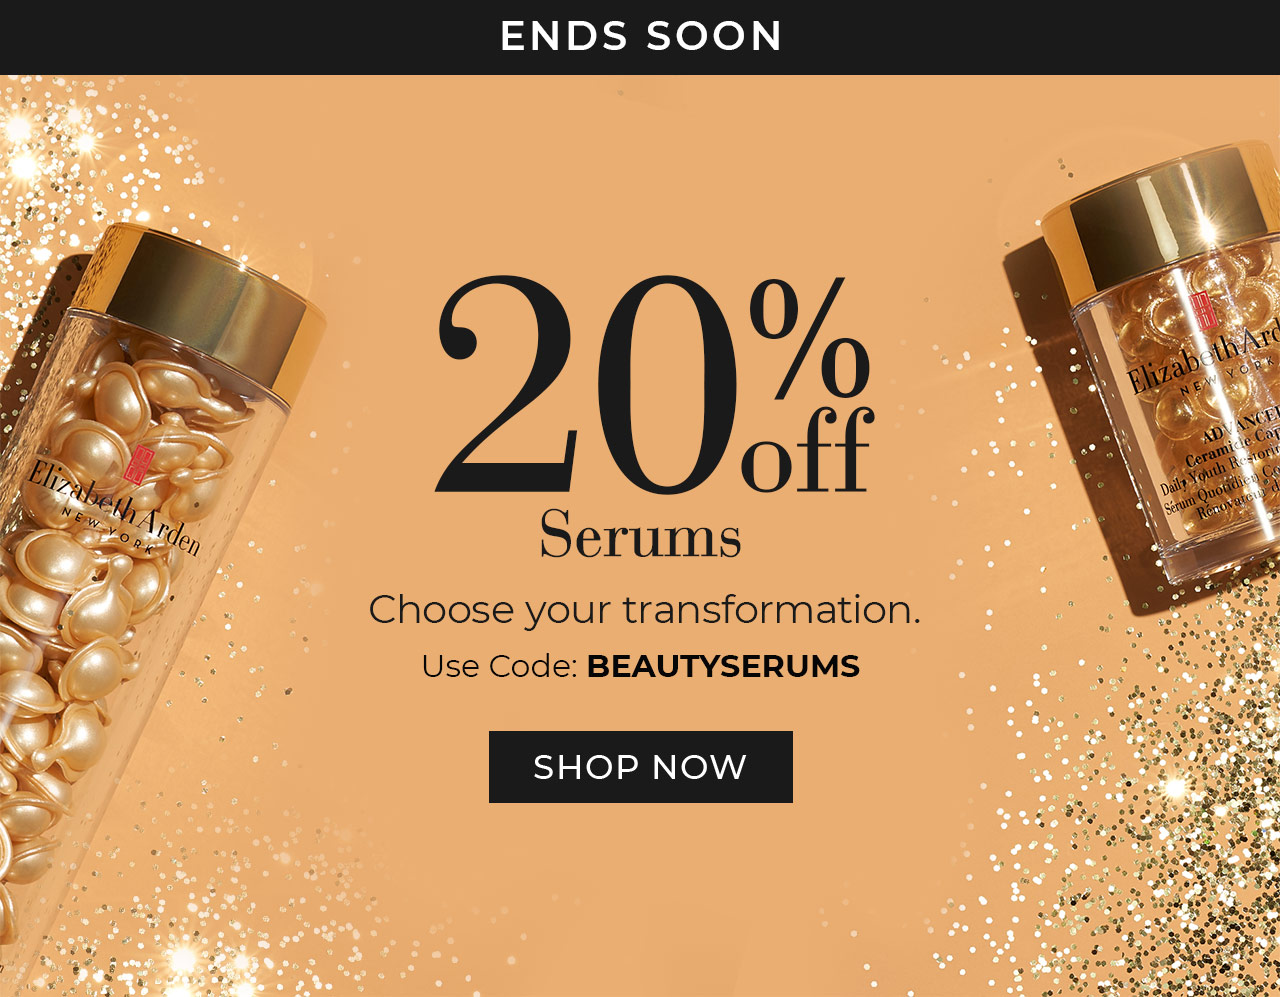 ENDS SOON | 20% Off Serums | Choose your transformation. | Use Code: BEAUTYSERUMS | SHOP NOW